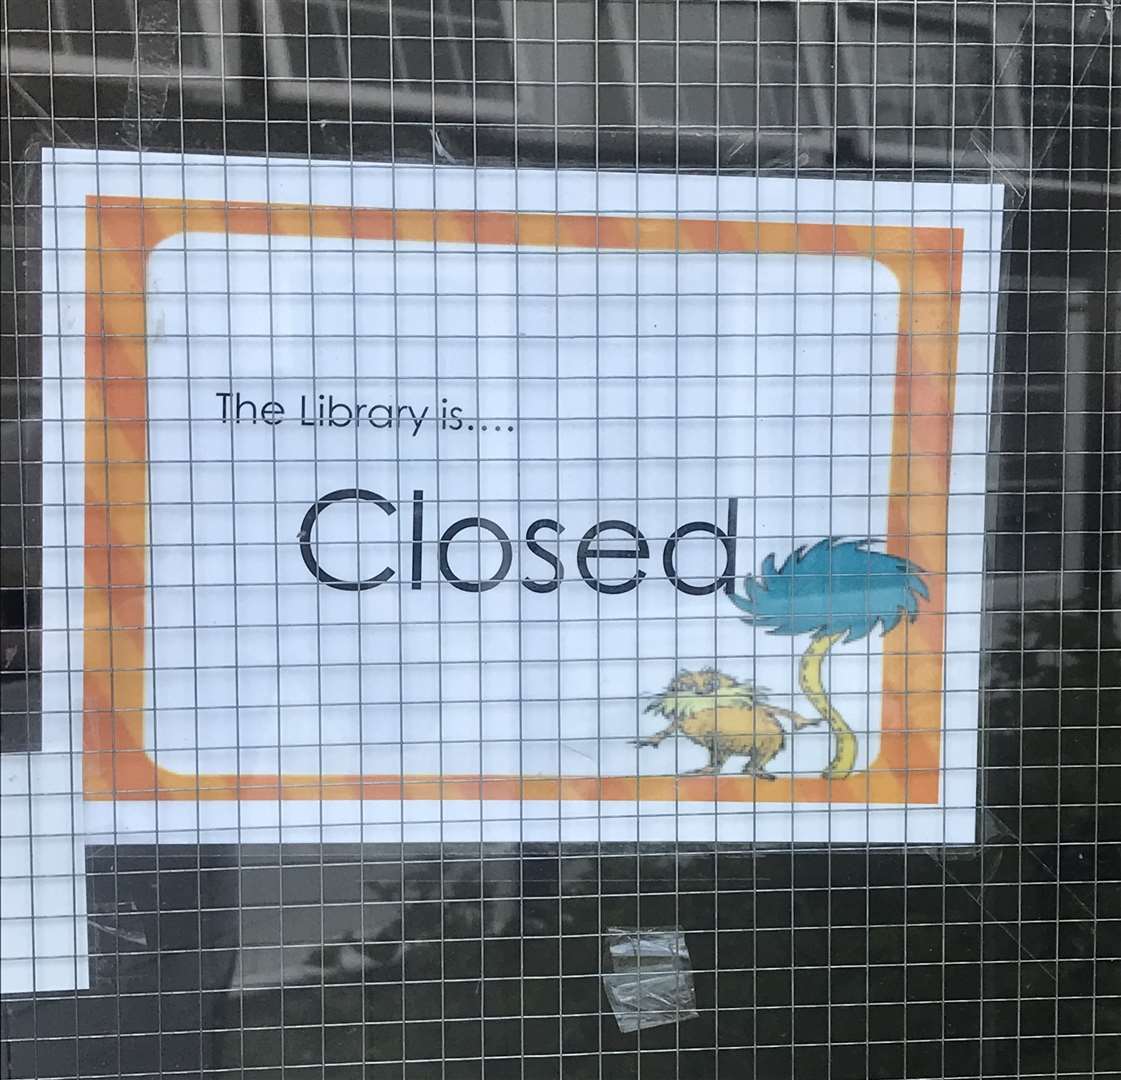 The school had to close the the library because of the break-in for a time